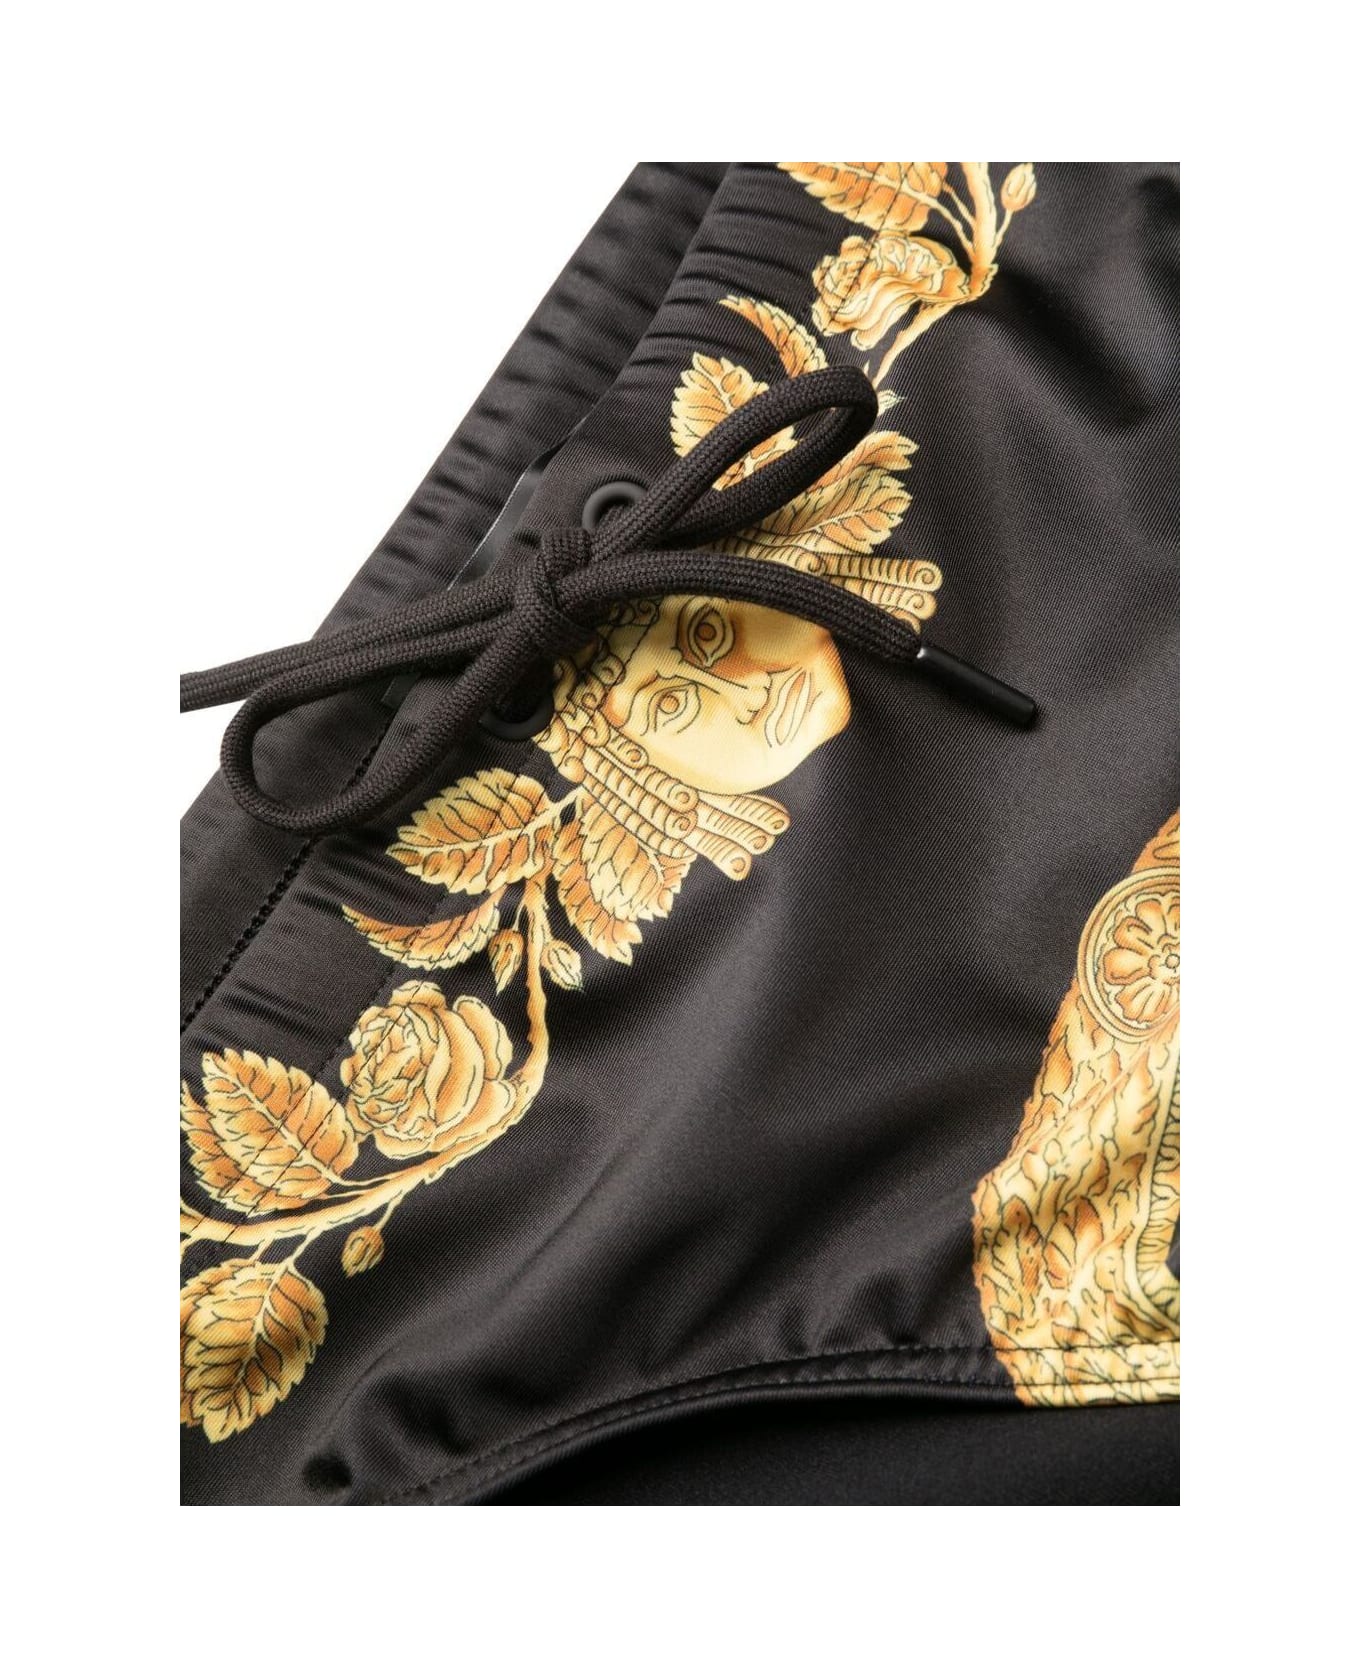 Versace Black Swim Scattered With Drawstring And Barocco Print In Sretch Polyester Man - Black